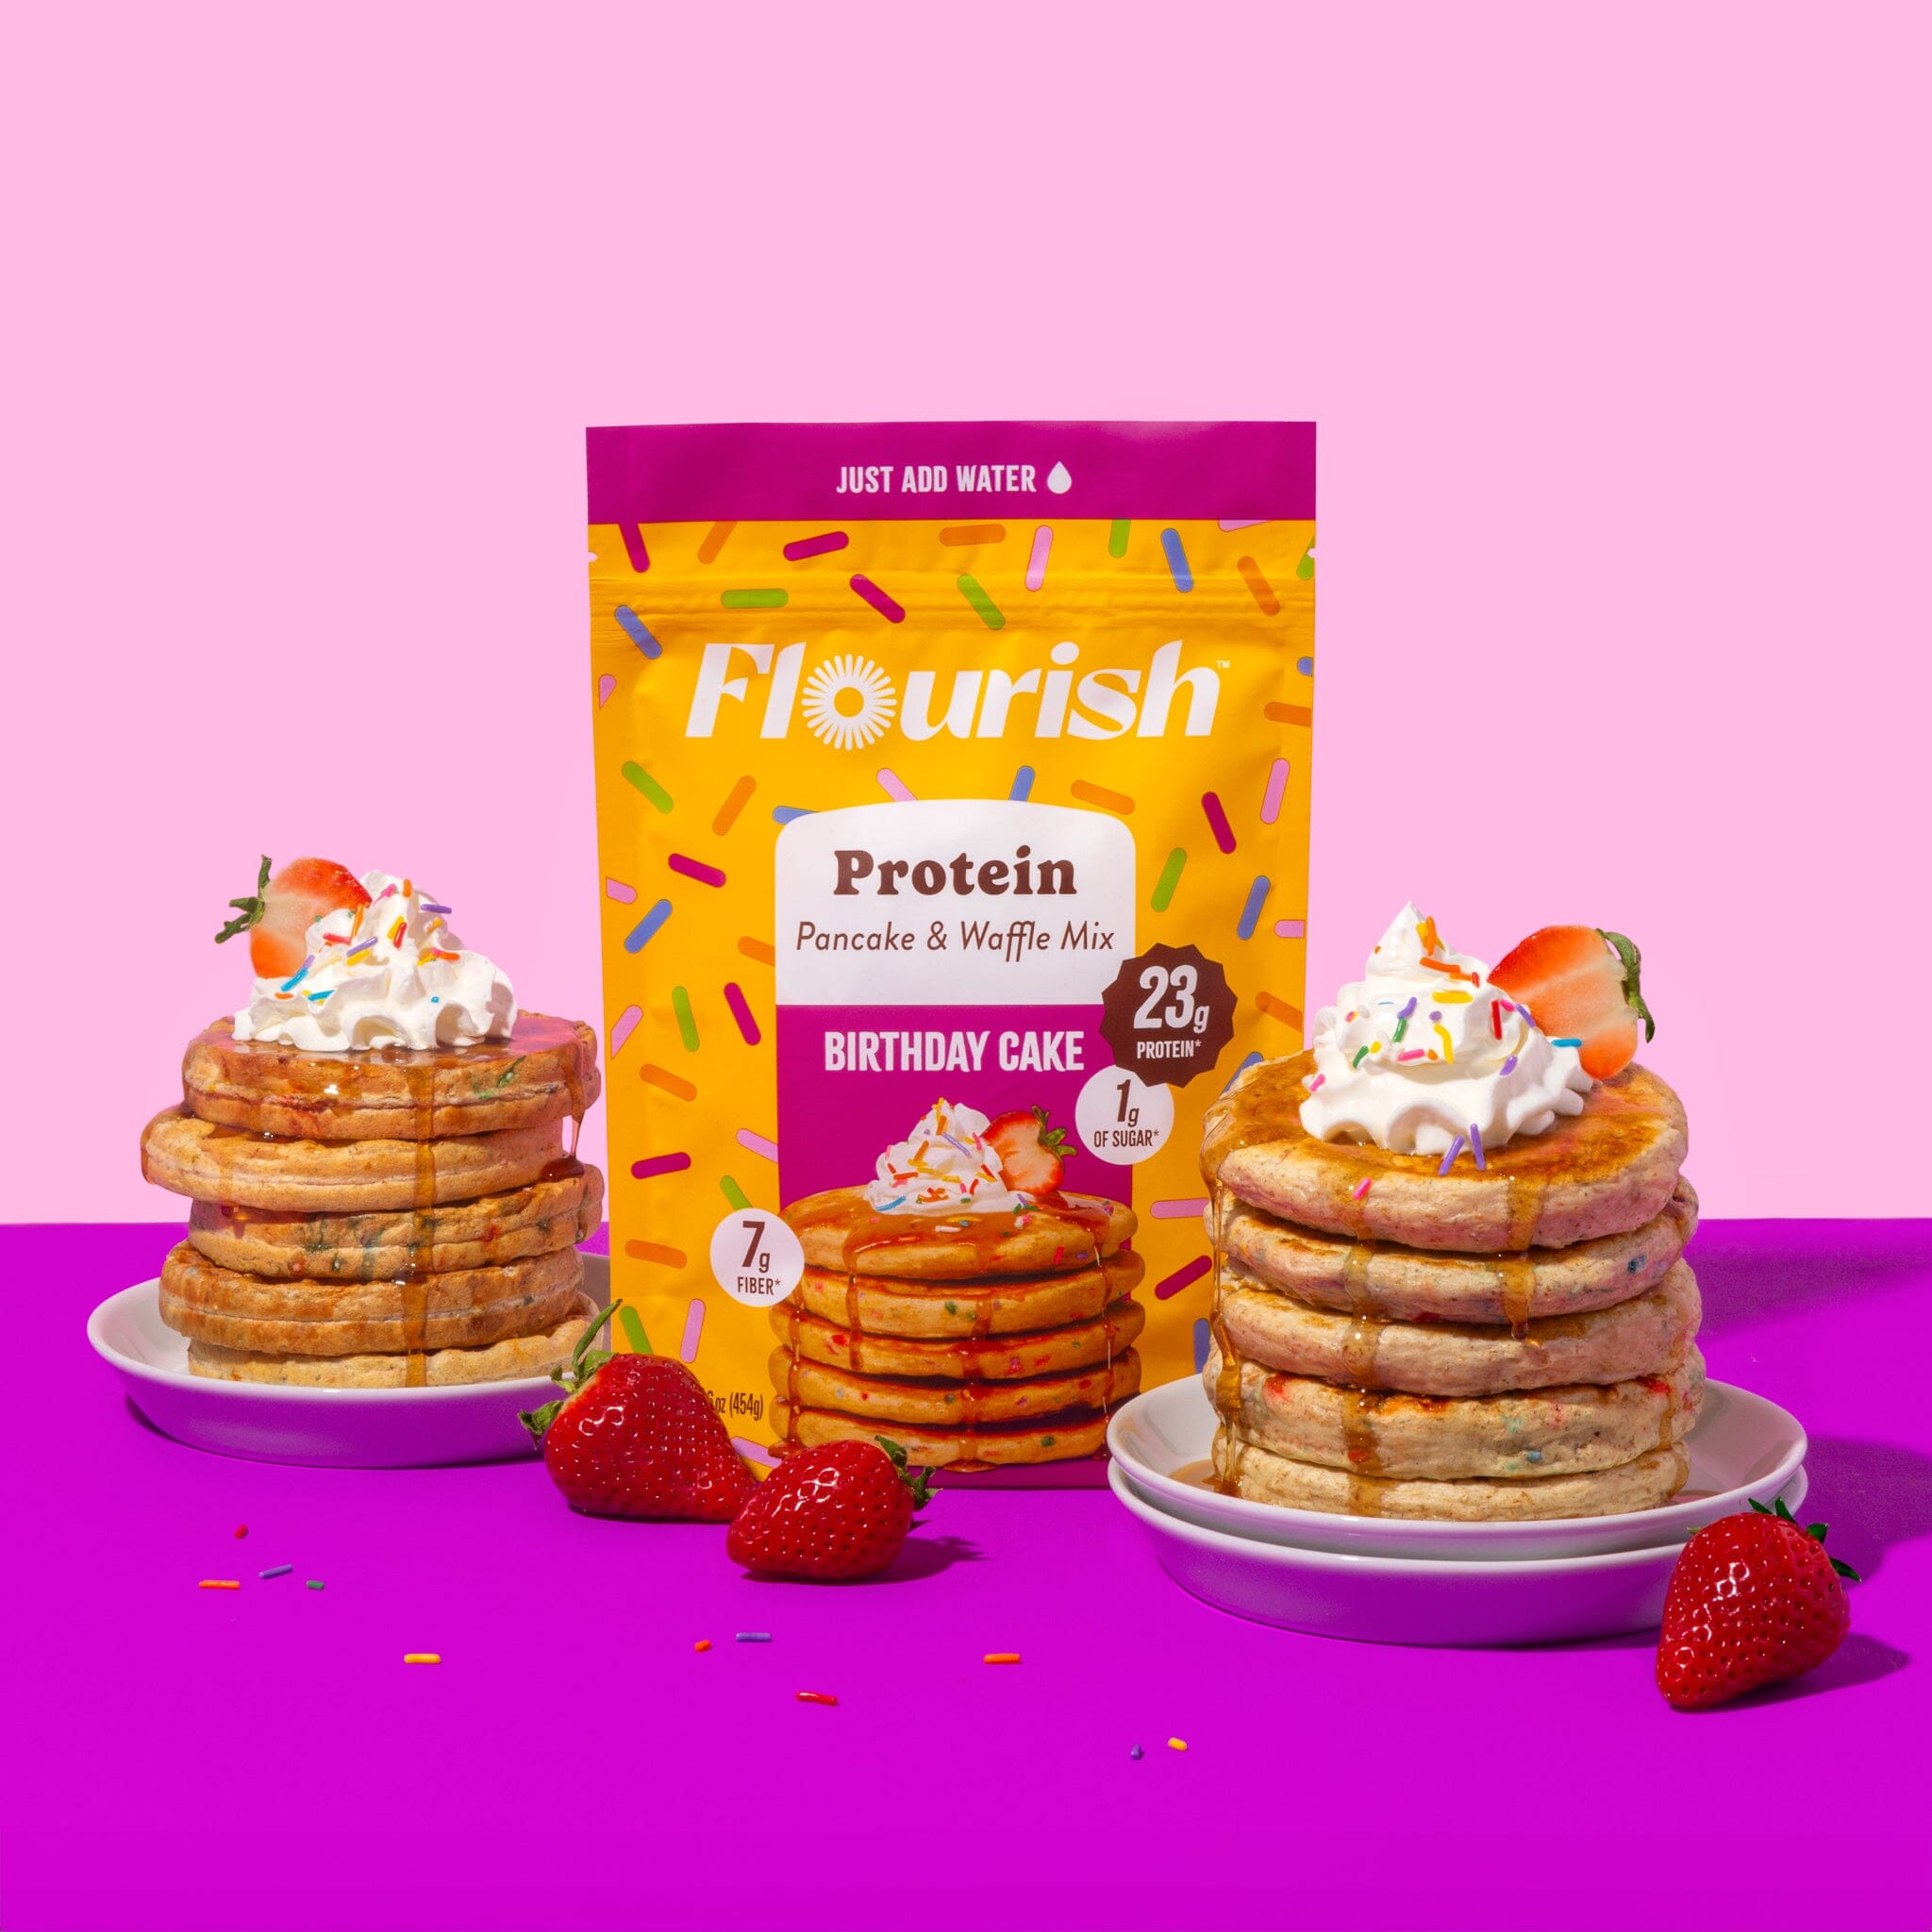 Used funfetti cake mix to make pancakes, was not disappointed! So good!  [1600x900] : r/FoodPorn